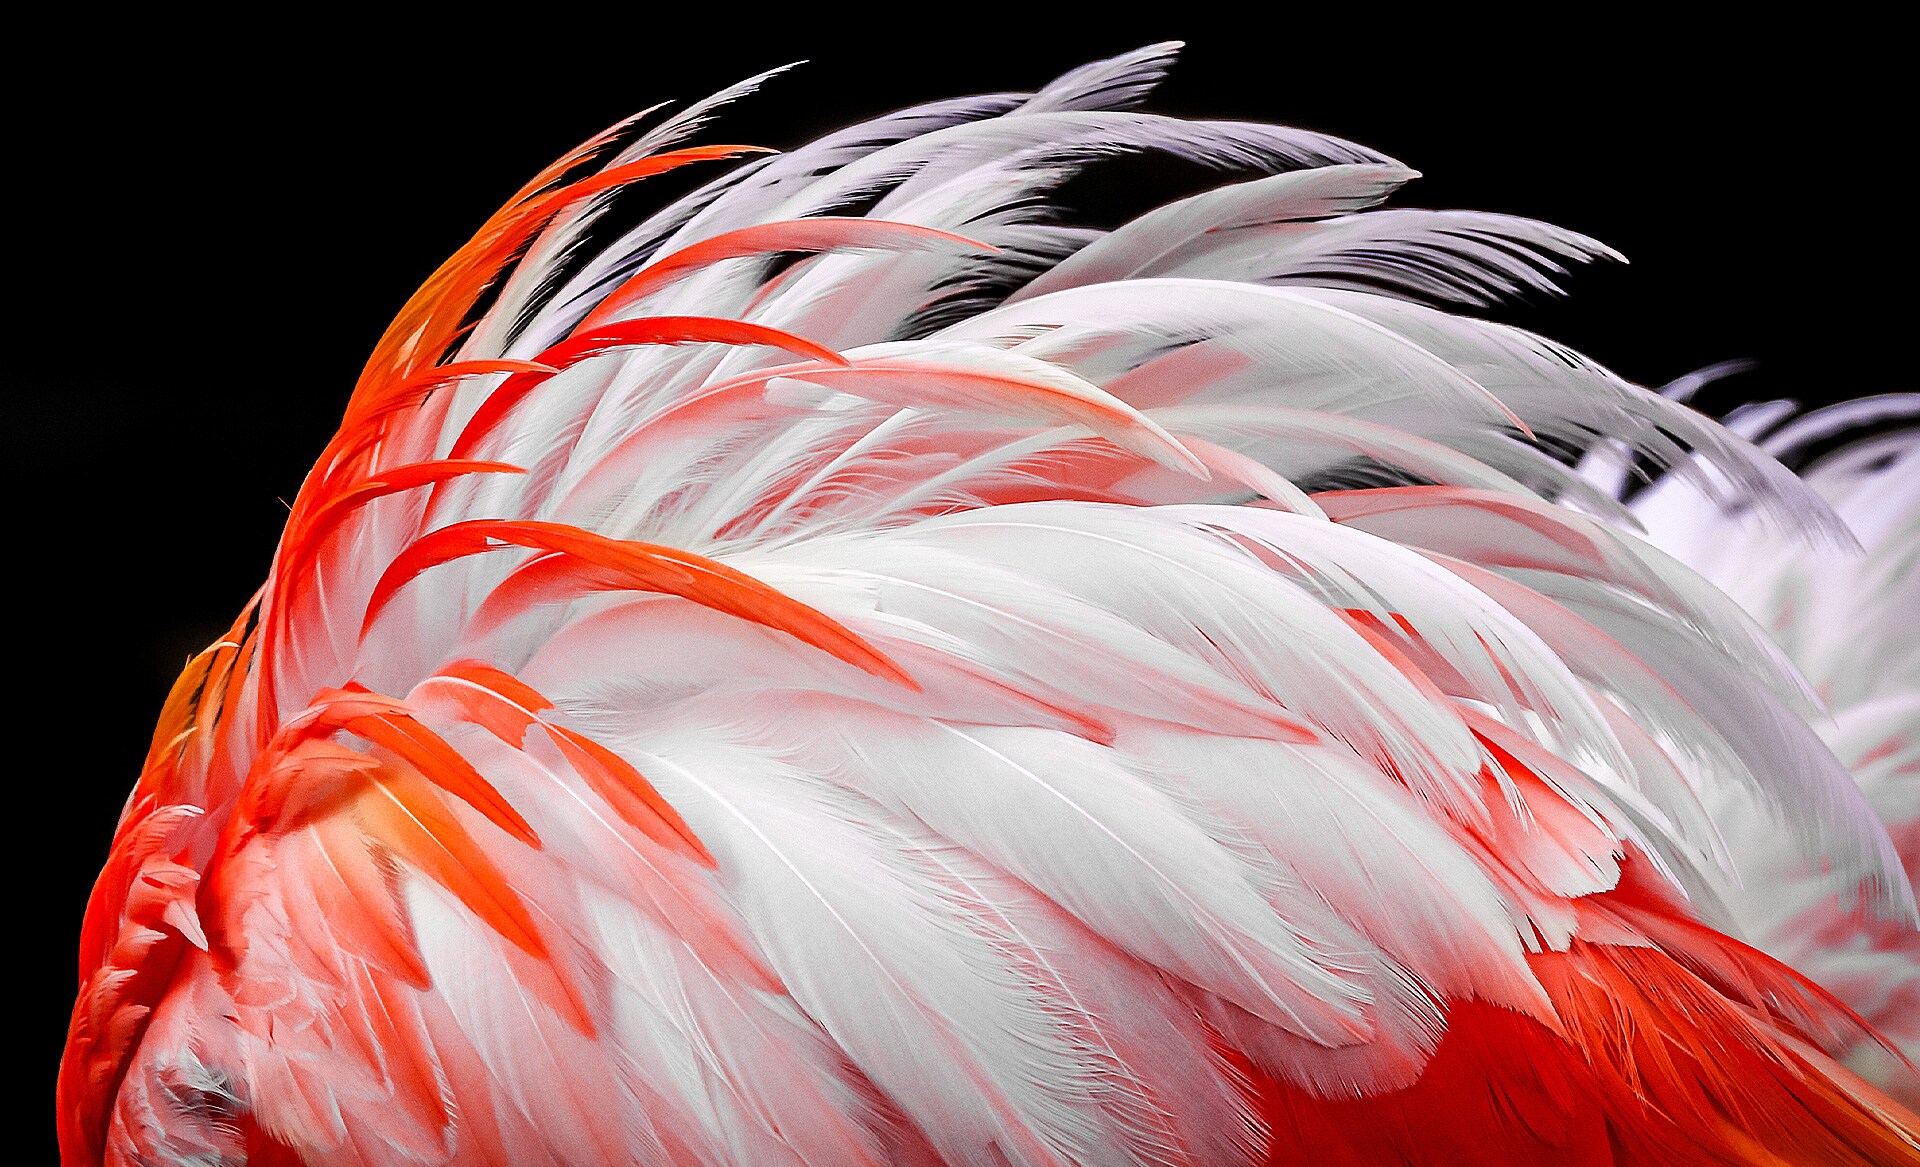 A dull image of white and orange flamingo feathers appears on the screen. They are depicted gradually getting brighter by 8%, 13%, 20%, 23%, 26%, and finally 30%.